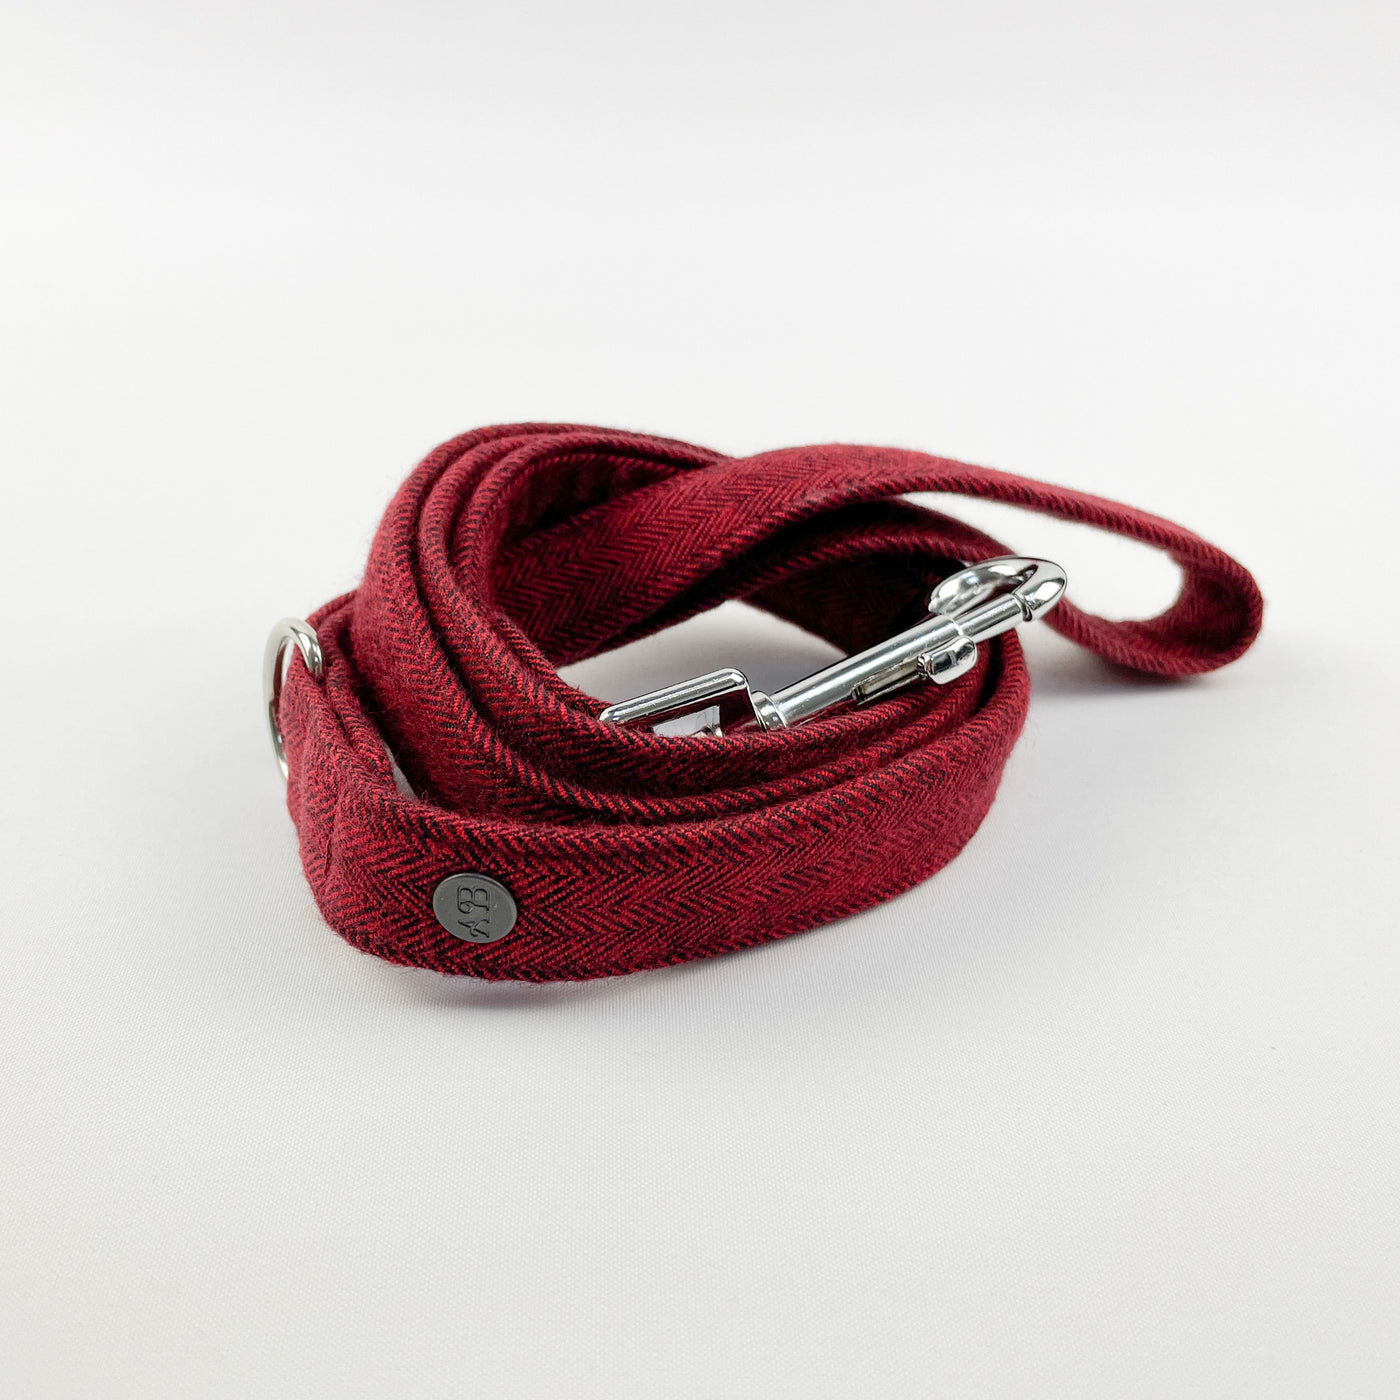 Cranberry Herringbone dog lead with silver clasp